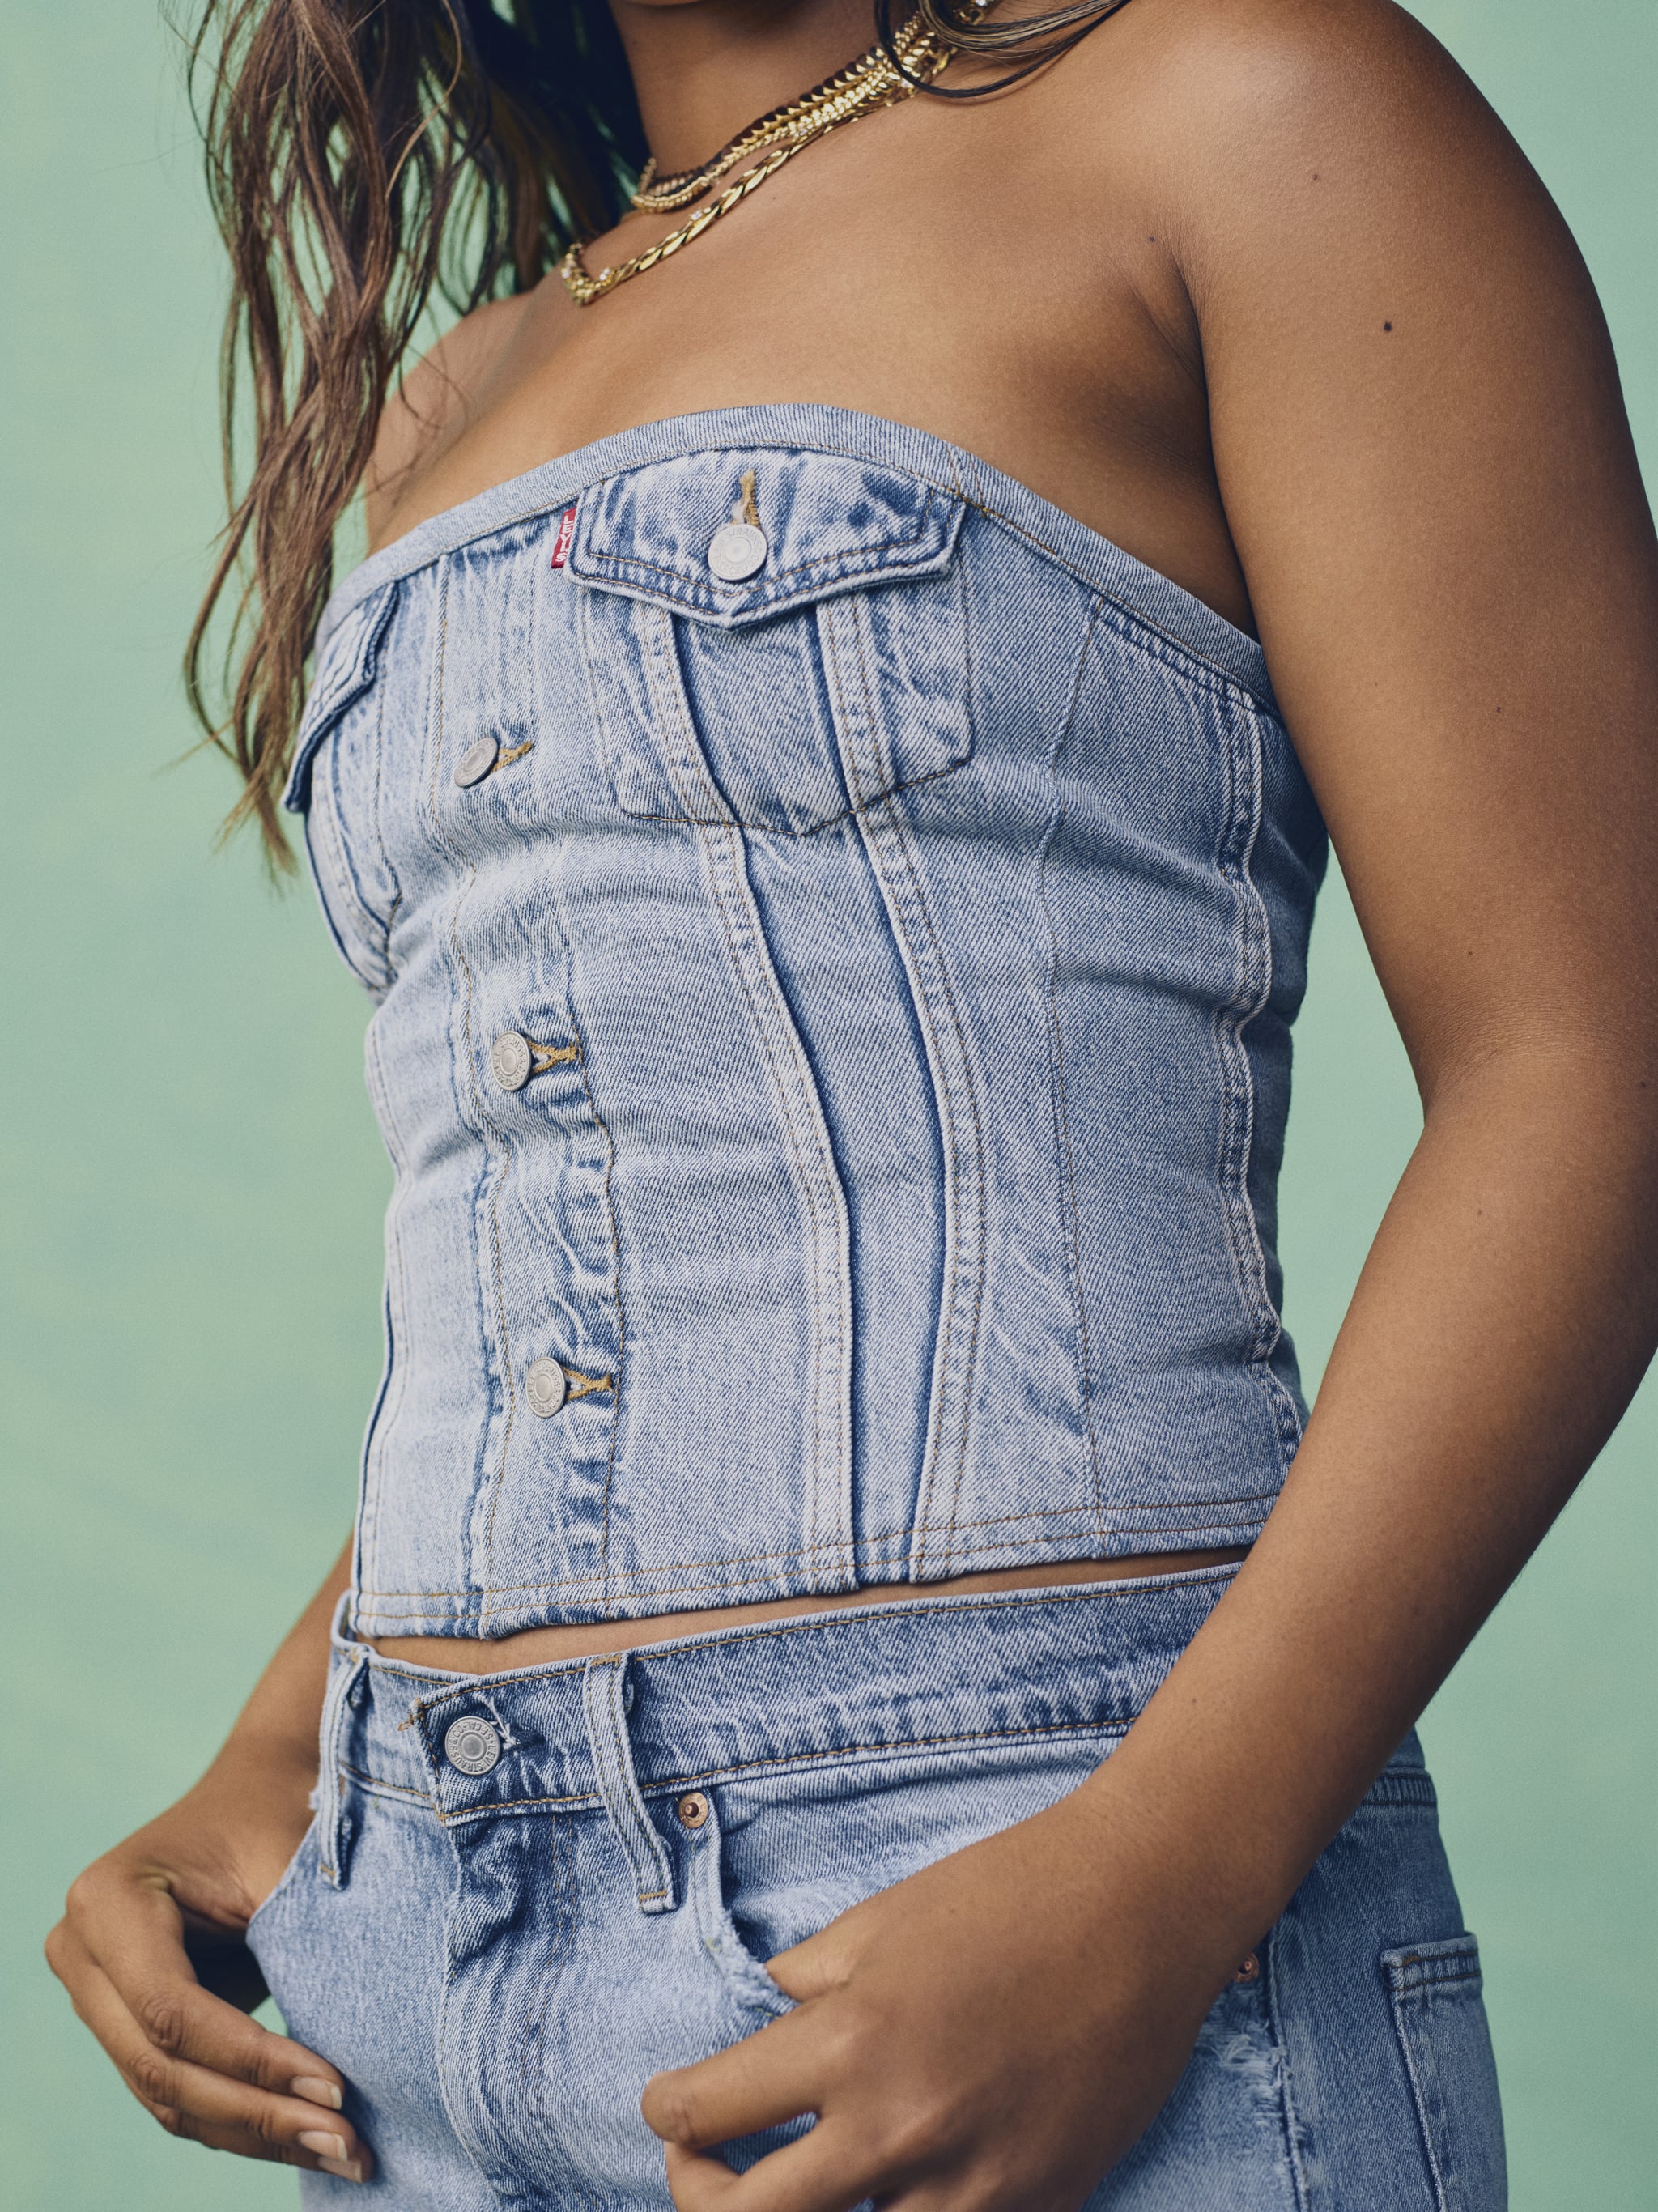 Naomi Osaka x Levi's Trucker Jacket Bustier | Naomi Osaka Dreamed Up a  Sustainable Levi's Collection That's So Perfectly Her | POPSUGAR Fashion  Photo 10